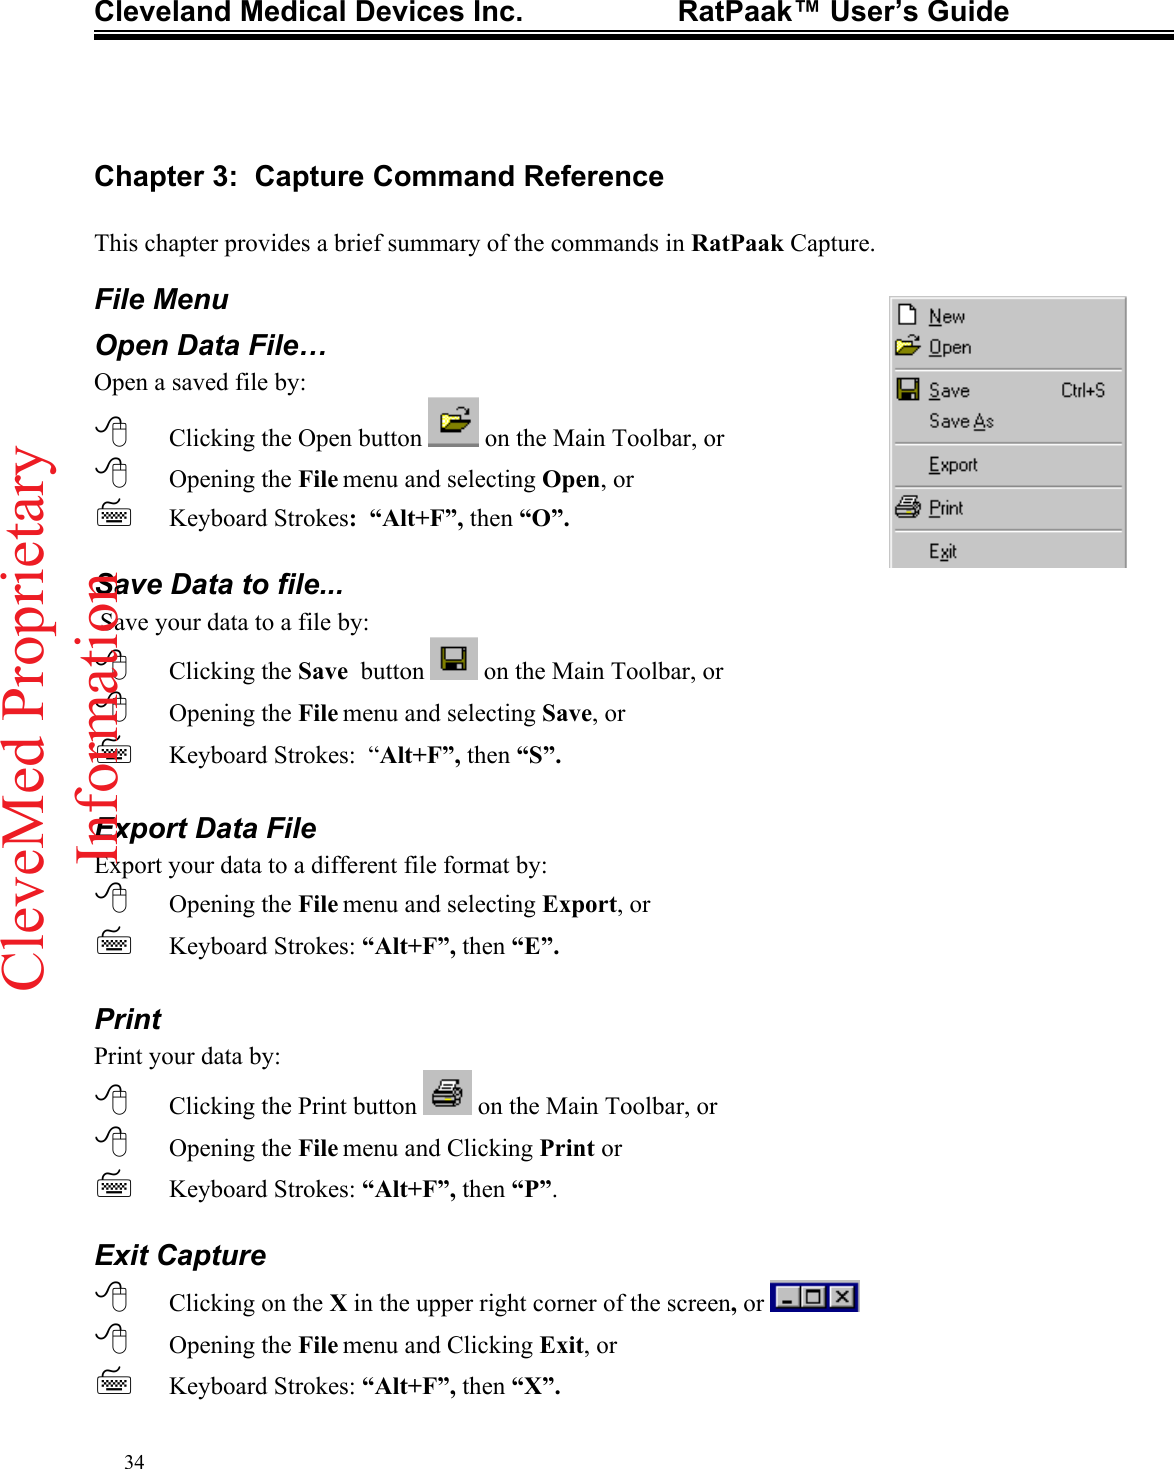 Cleveland Medical Devices Inc.                   RatPaak™ User’s Guide   Chapter 3:  Capture Command Reference  This chapter provides a brief summary of the commands in RatPaak Capture. File Menu Open Data File… Open a saved file by:  Clicking the Open button   on the Main Toolbar, or  Opening the File menu and selecting Open, or  Keyboard Strokes:  “Alt+F”, then “O”.  Save Data to file...  Save your data to a file by:  Clicking the Save  button   on the Main Toolbar, or  Opening the File menu and selecting Save, or  Keyboard Strokes:  “Alt+F”, then “S”.  Export Data File Export your data to a different file format by:  Opening the File menu and selecting Export, or     Keyboard Strokes: “Alt+F”, then “E”.  Print Print your data by:  Clicking the Print button   on the Main Toolbar, or  Opening the File menu and Clicking Print or  Keyboard Strokes: “Alt+F”, then “P”.  Exit Capture  Clicking on the X in the upper right corner of the screen, or    Opening the File menu and Clicking Exit, or  Keyboard Strokes: “Alt+F”, then “X”. 34CleveMed ProprietaryInformation